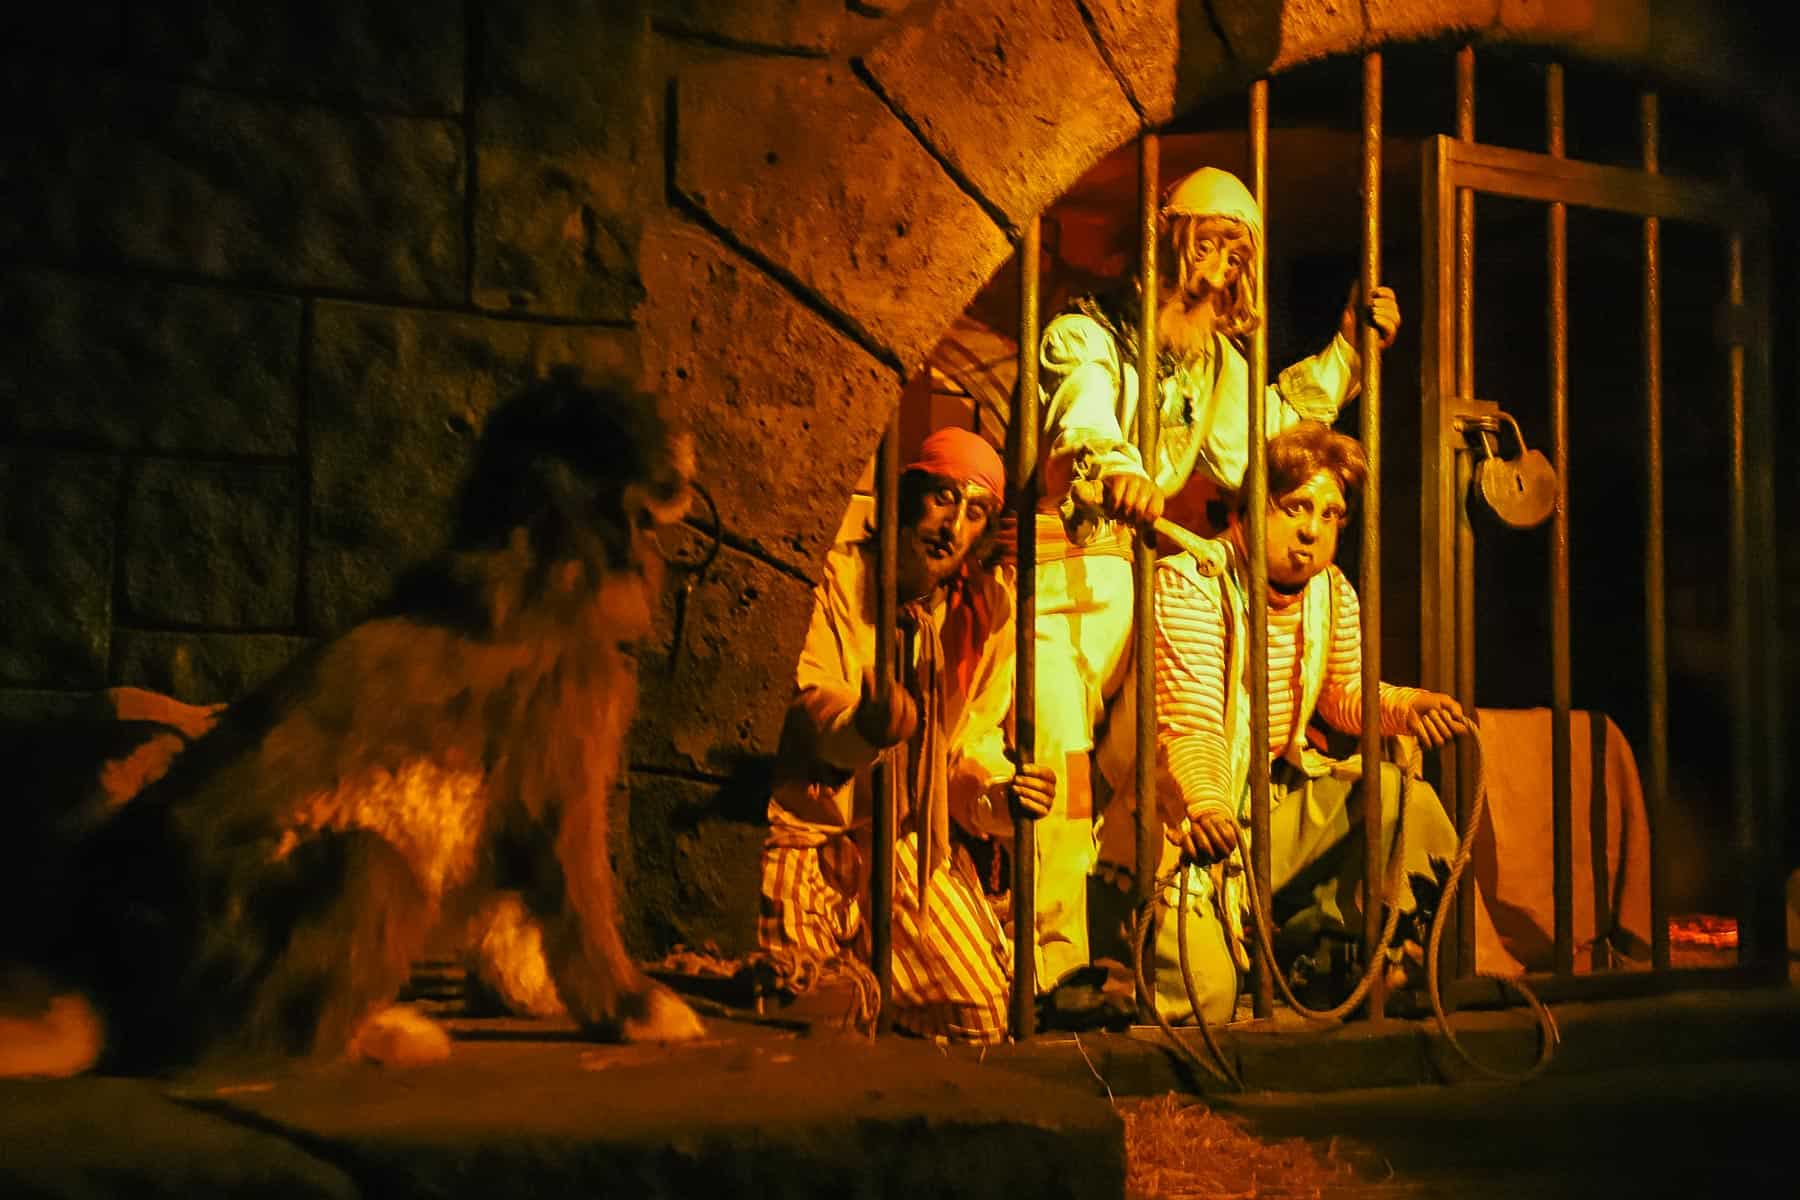 Jailed pirates throwing the dog a bone. The dog has a set of keys in his mouth. 